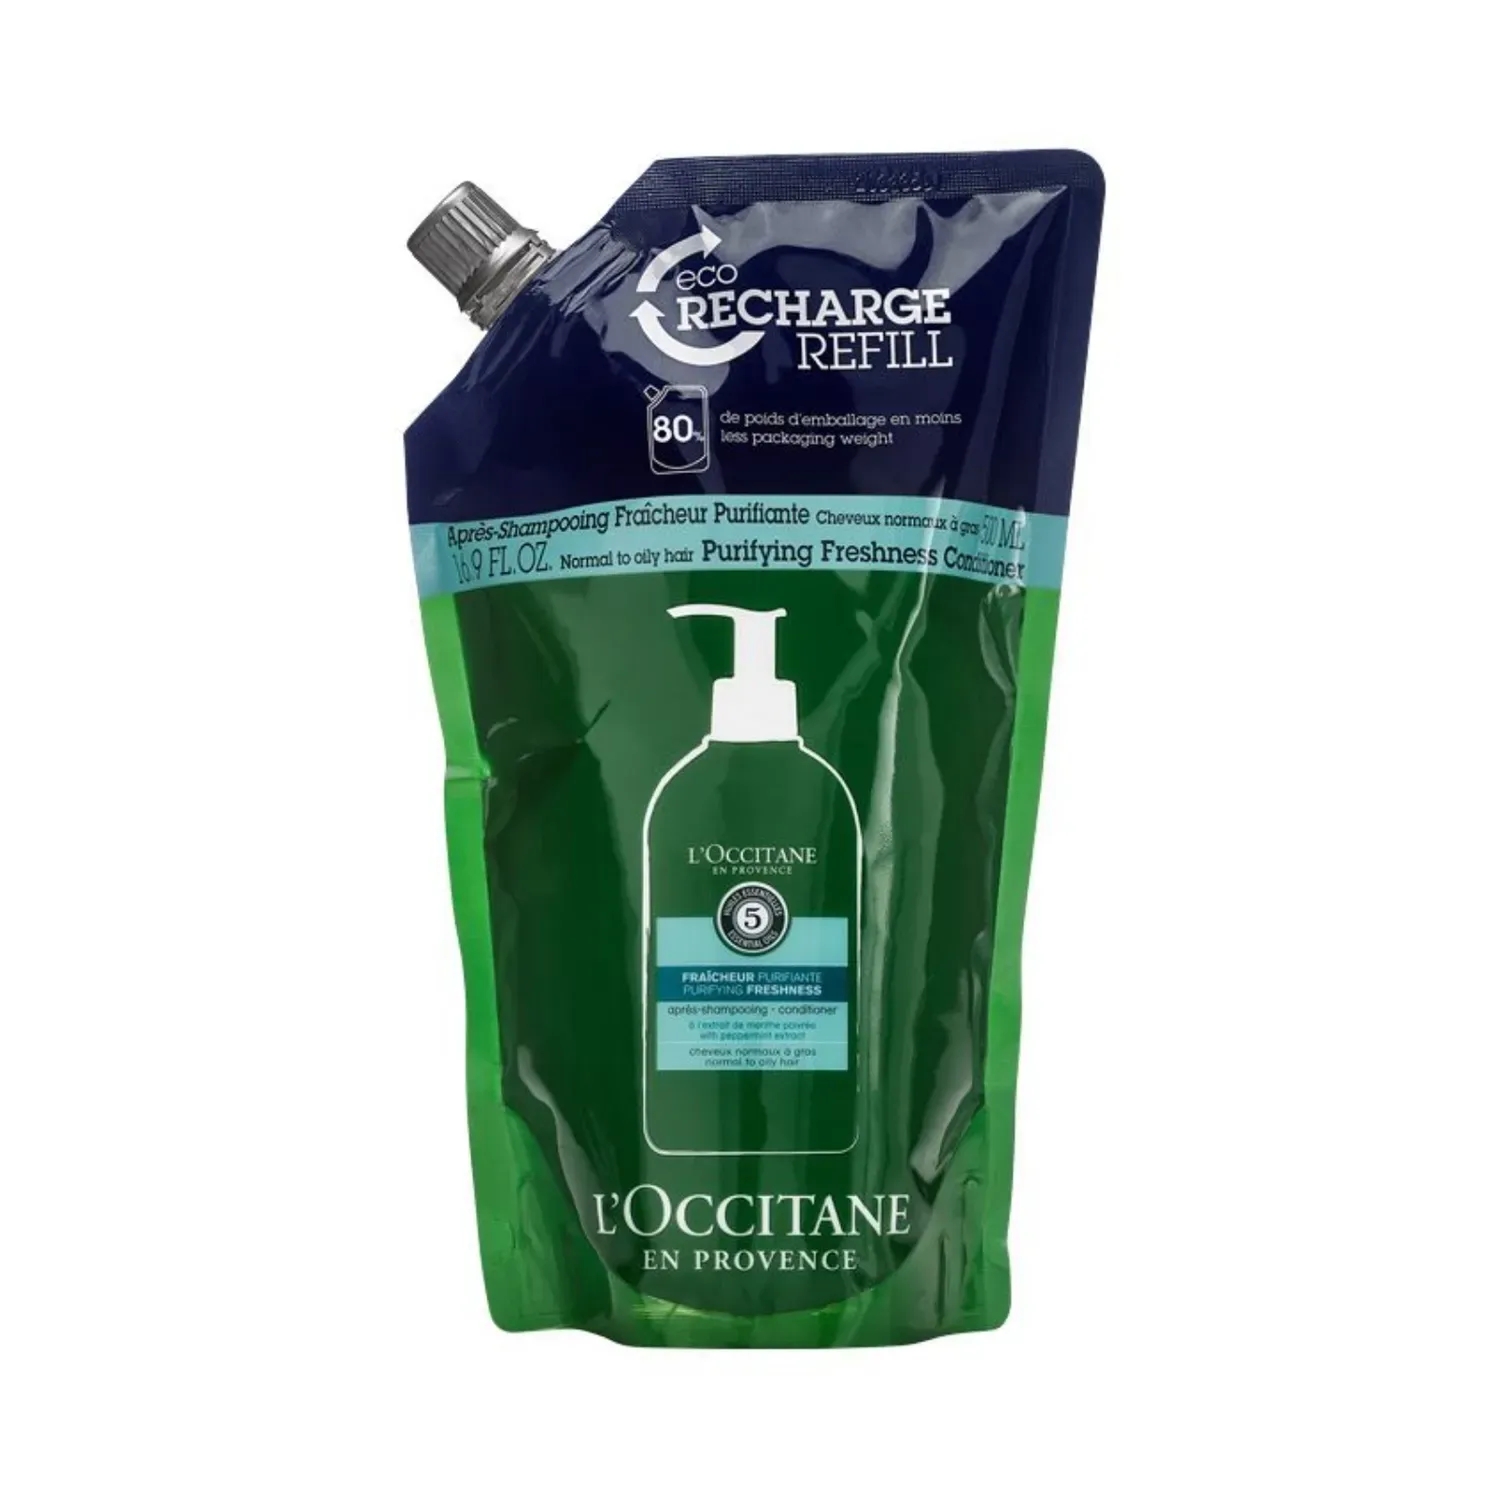 L'occitane | L'occitane EN Provence Purifying Freshness Shampooing Conditioner Eco Reacharge Refill (500ml)